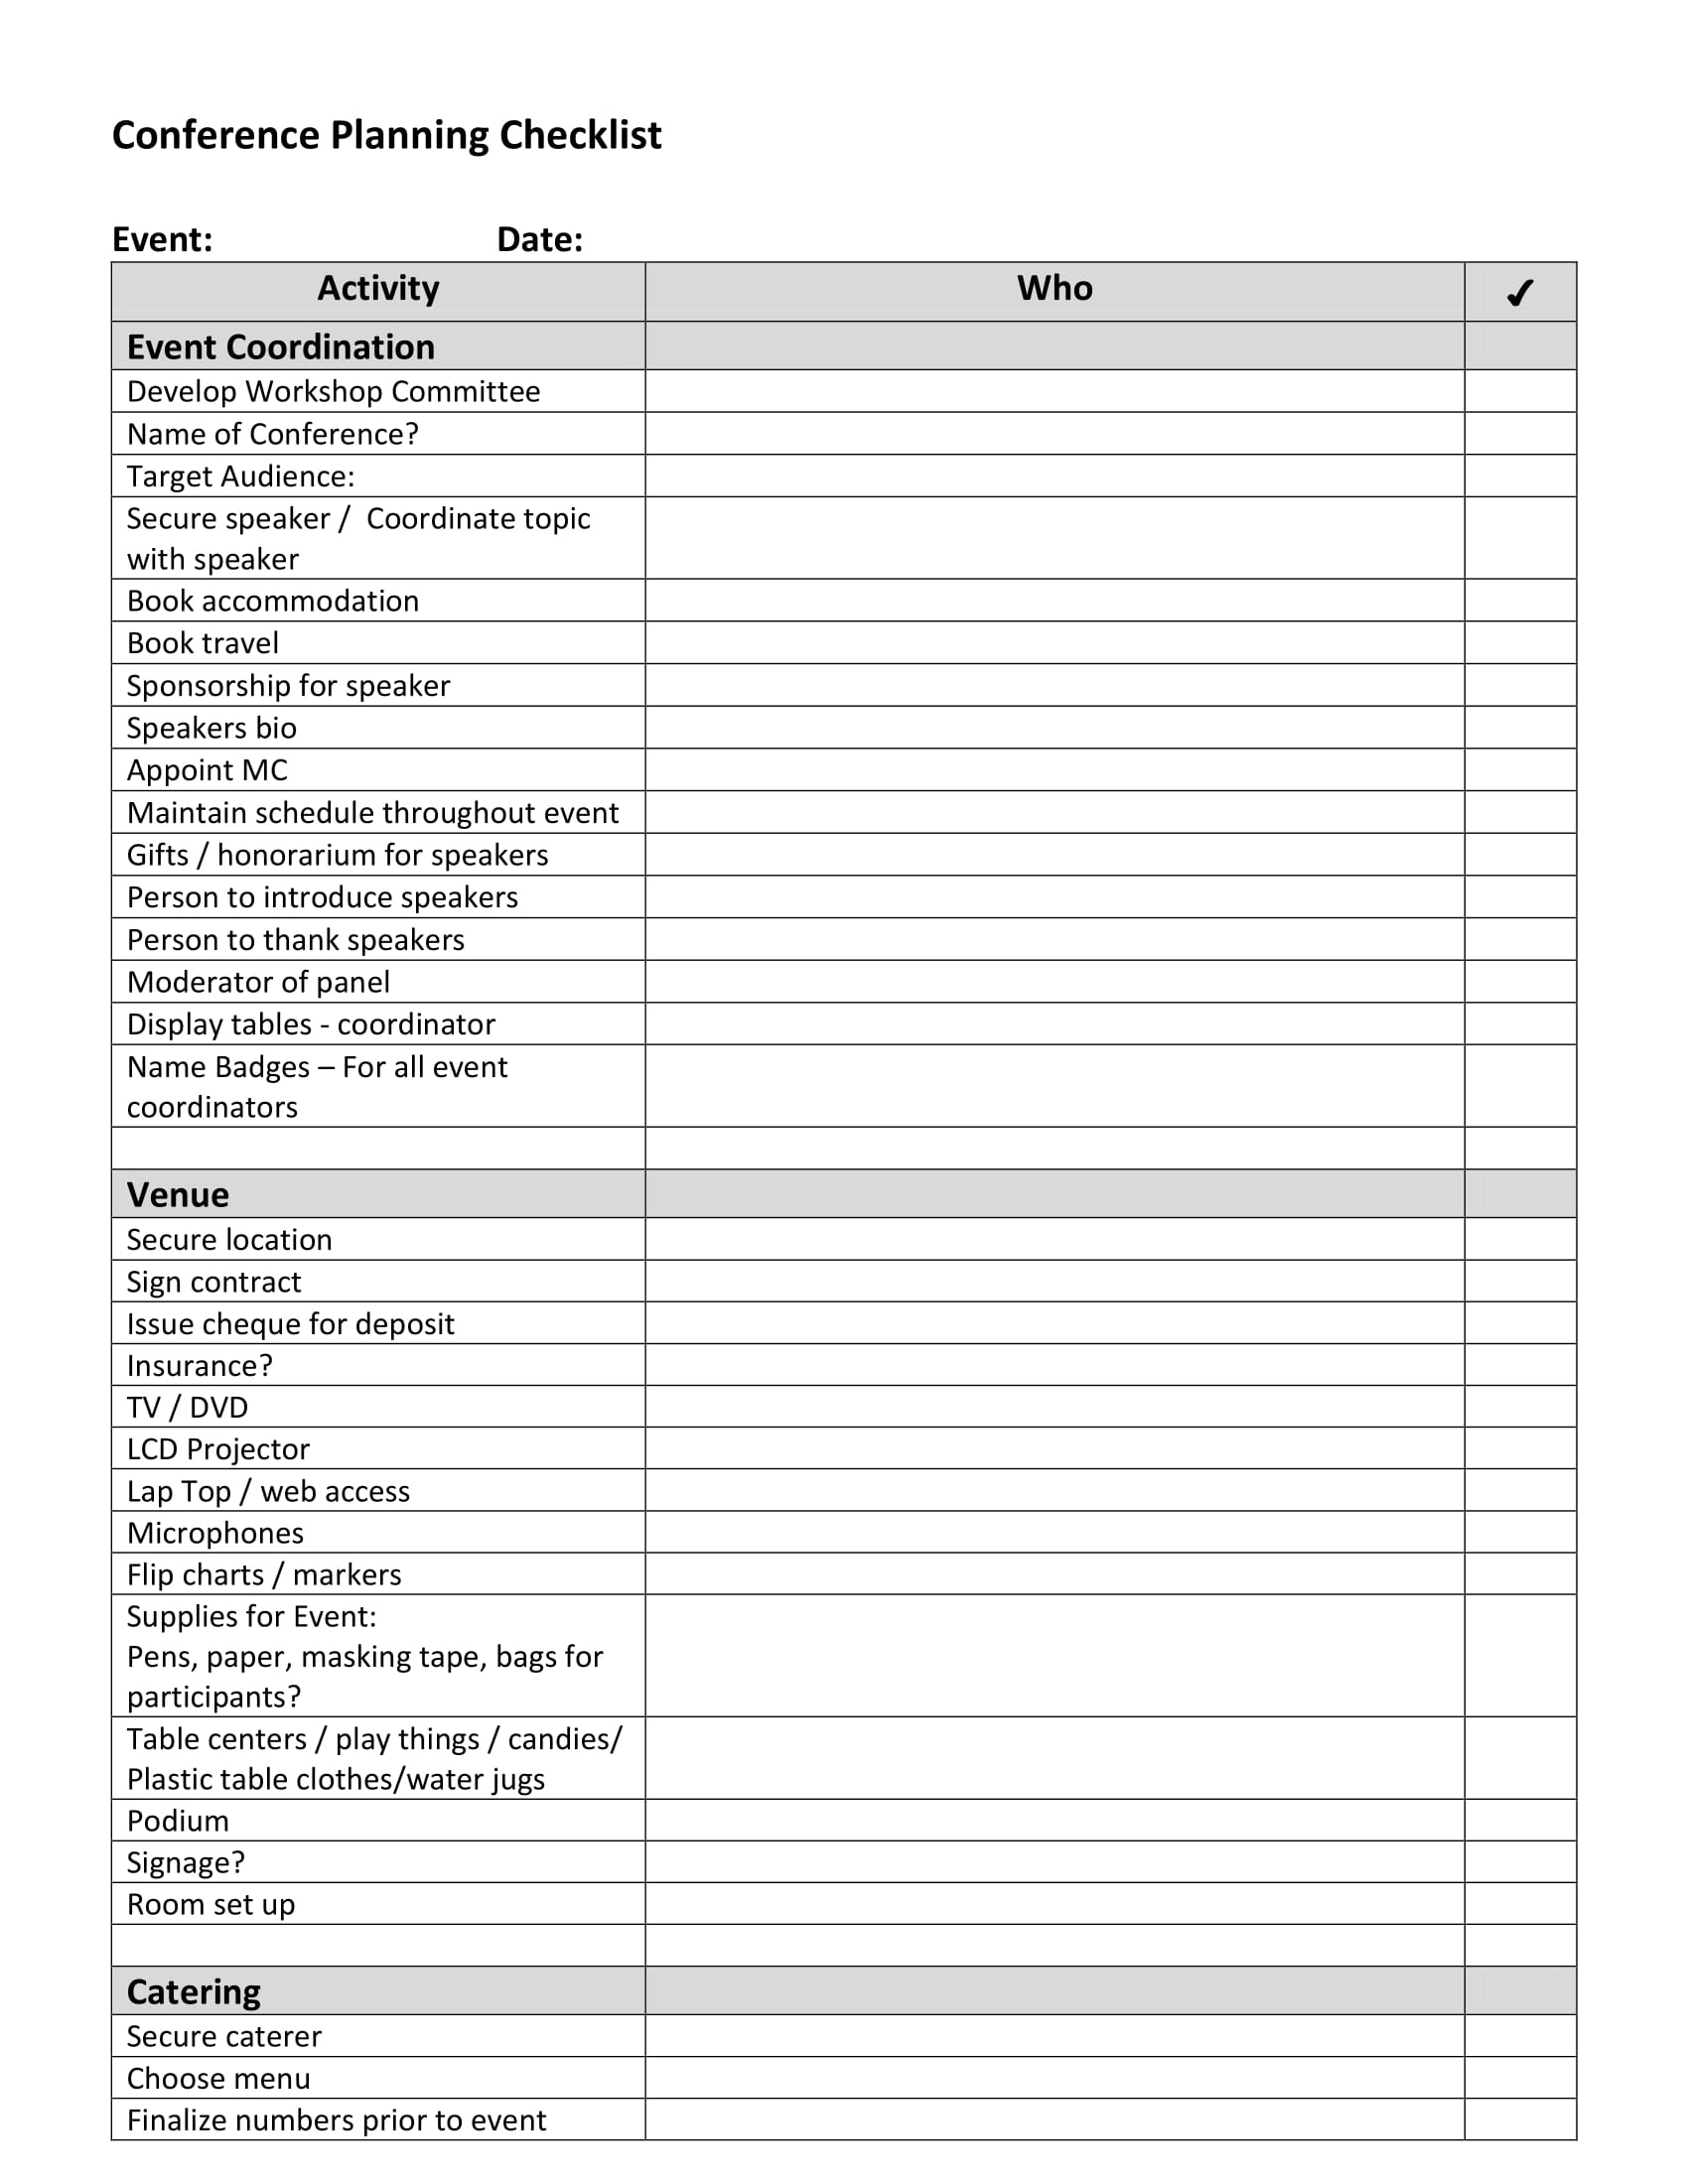 conference planning checklist example